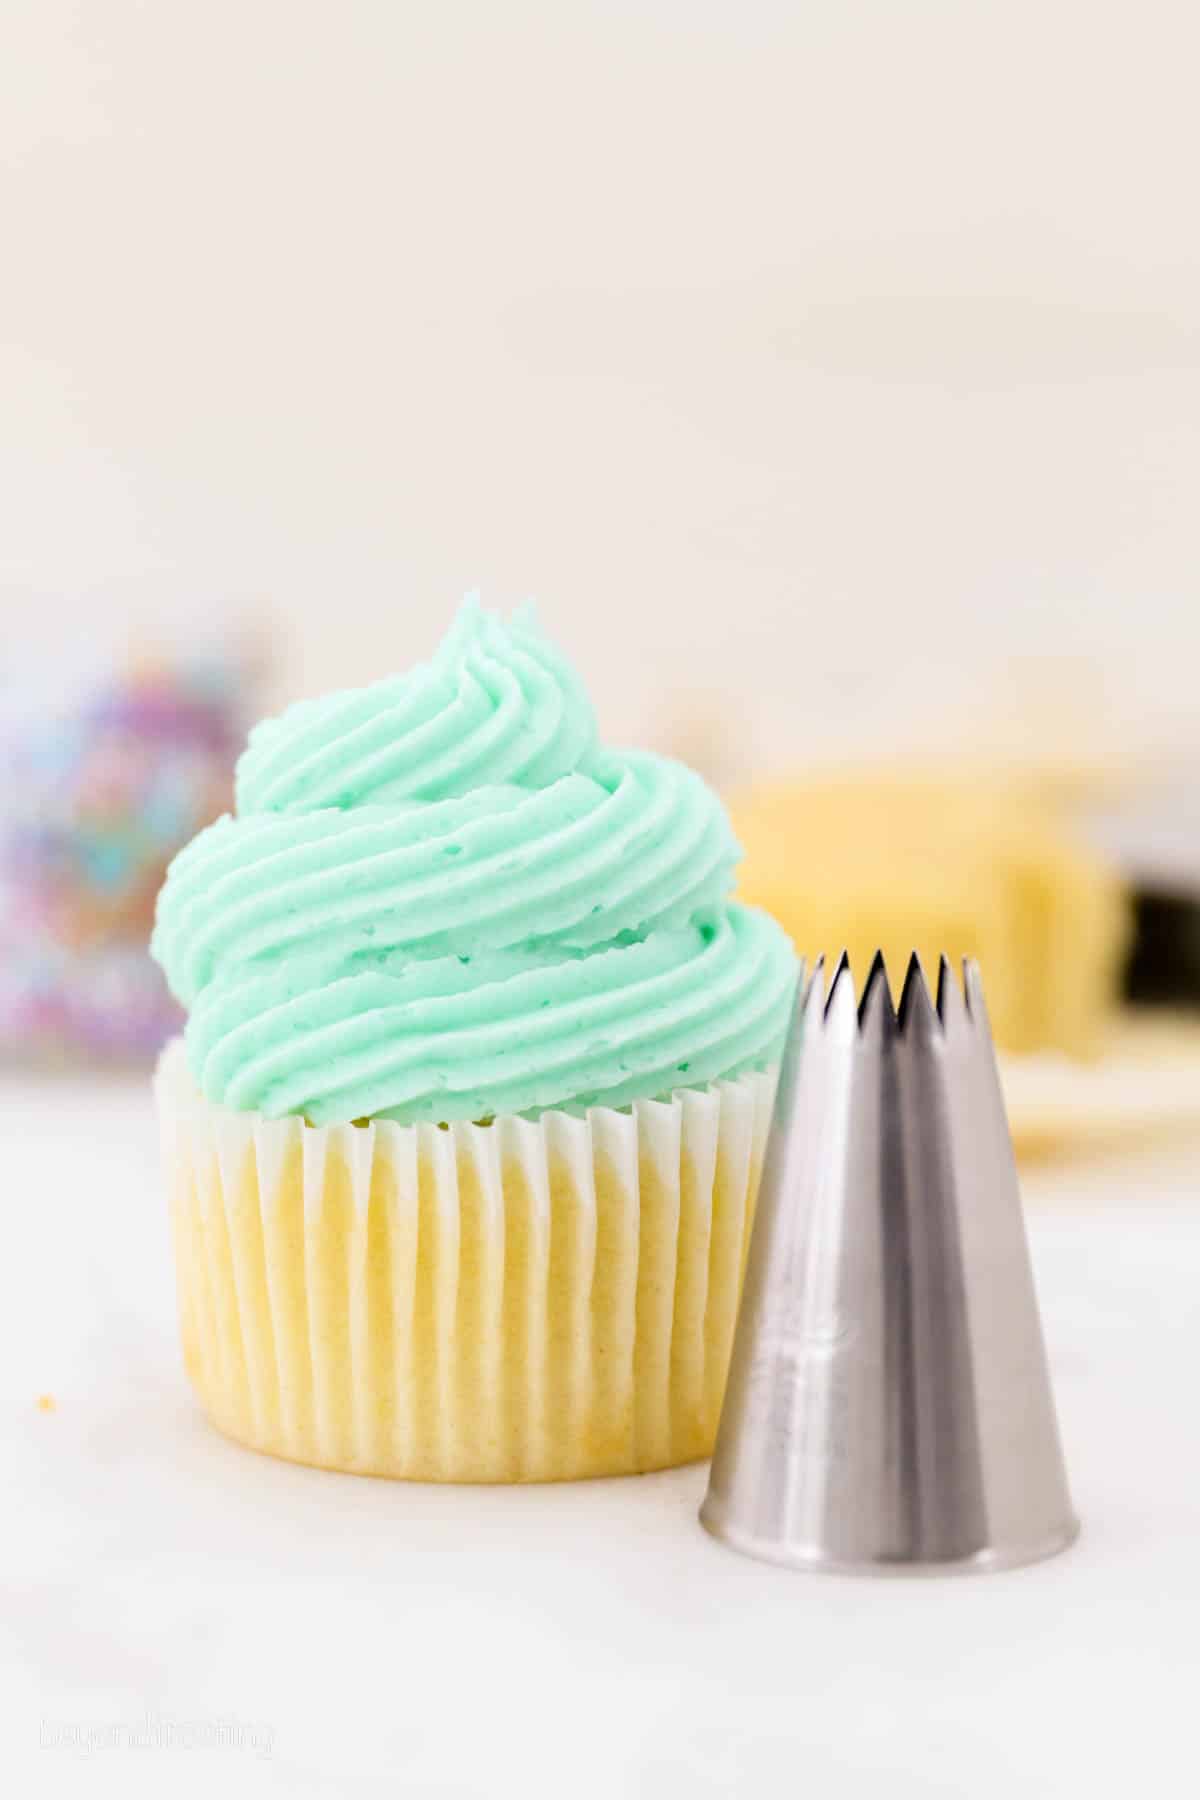 Piping Tips Buying Guide